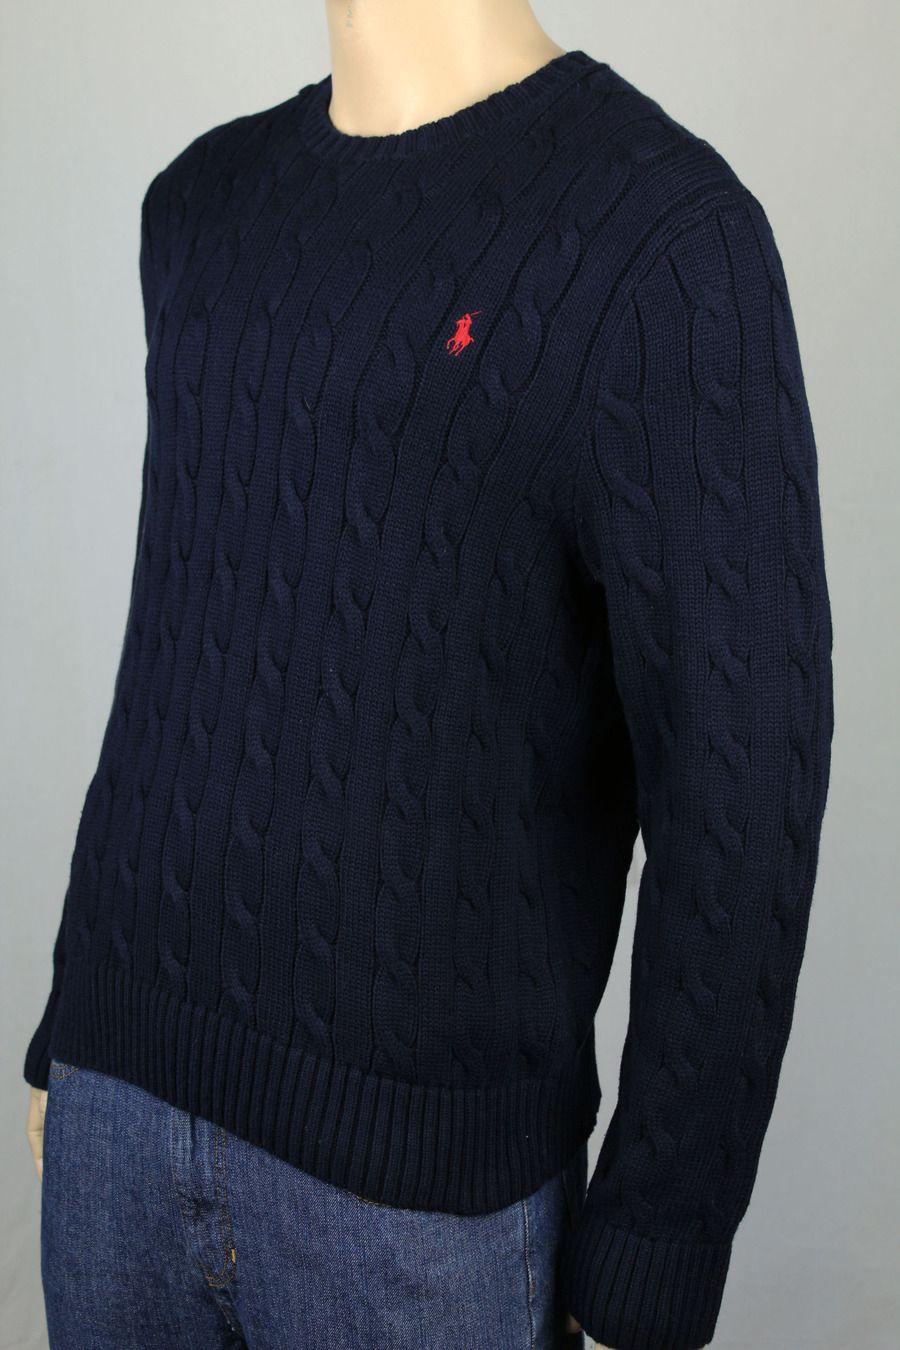 Blue with Red Polo Logo - Polo Ralph Lauren Navy Blue Crewneck Cable-knit Sweater Red Pony NWT ...